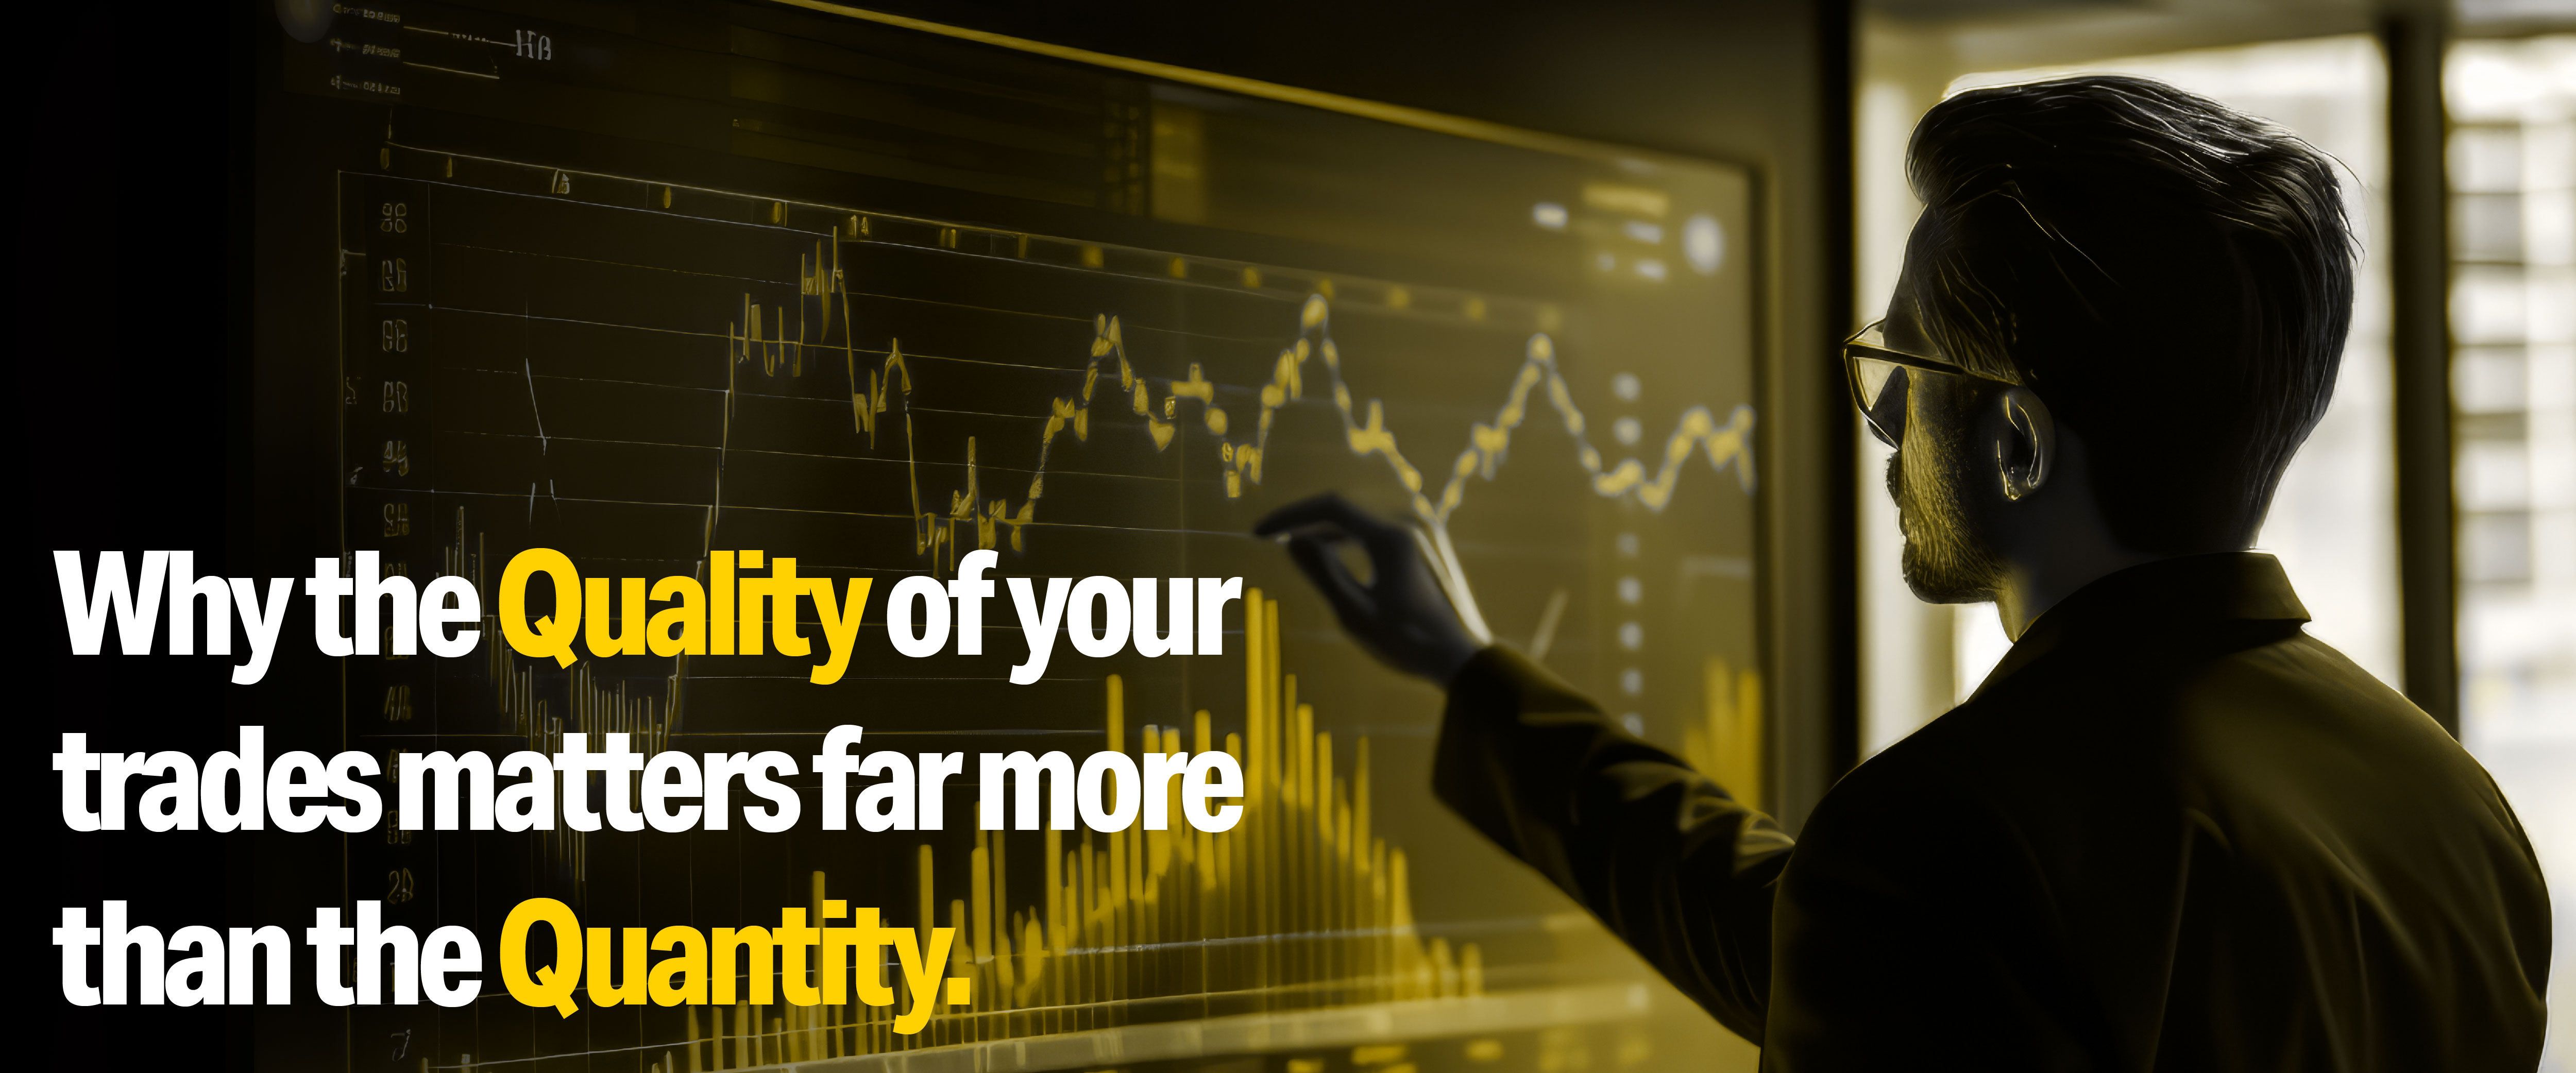 Why the Quality of Your Trades Matters Far More than the Quantity